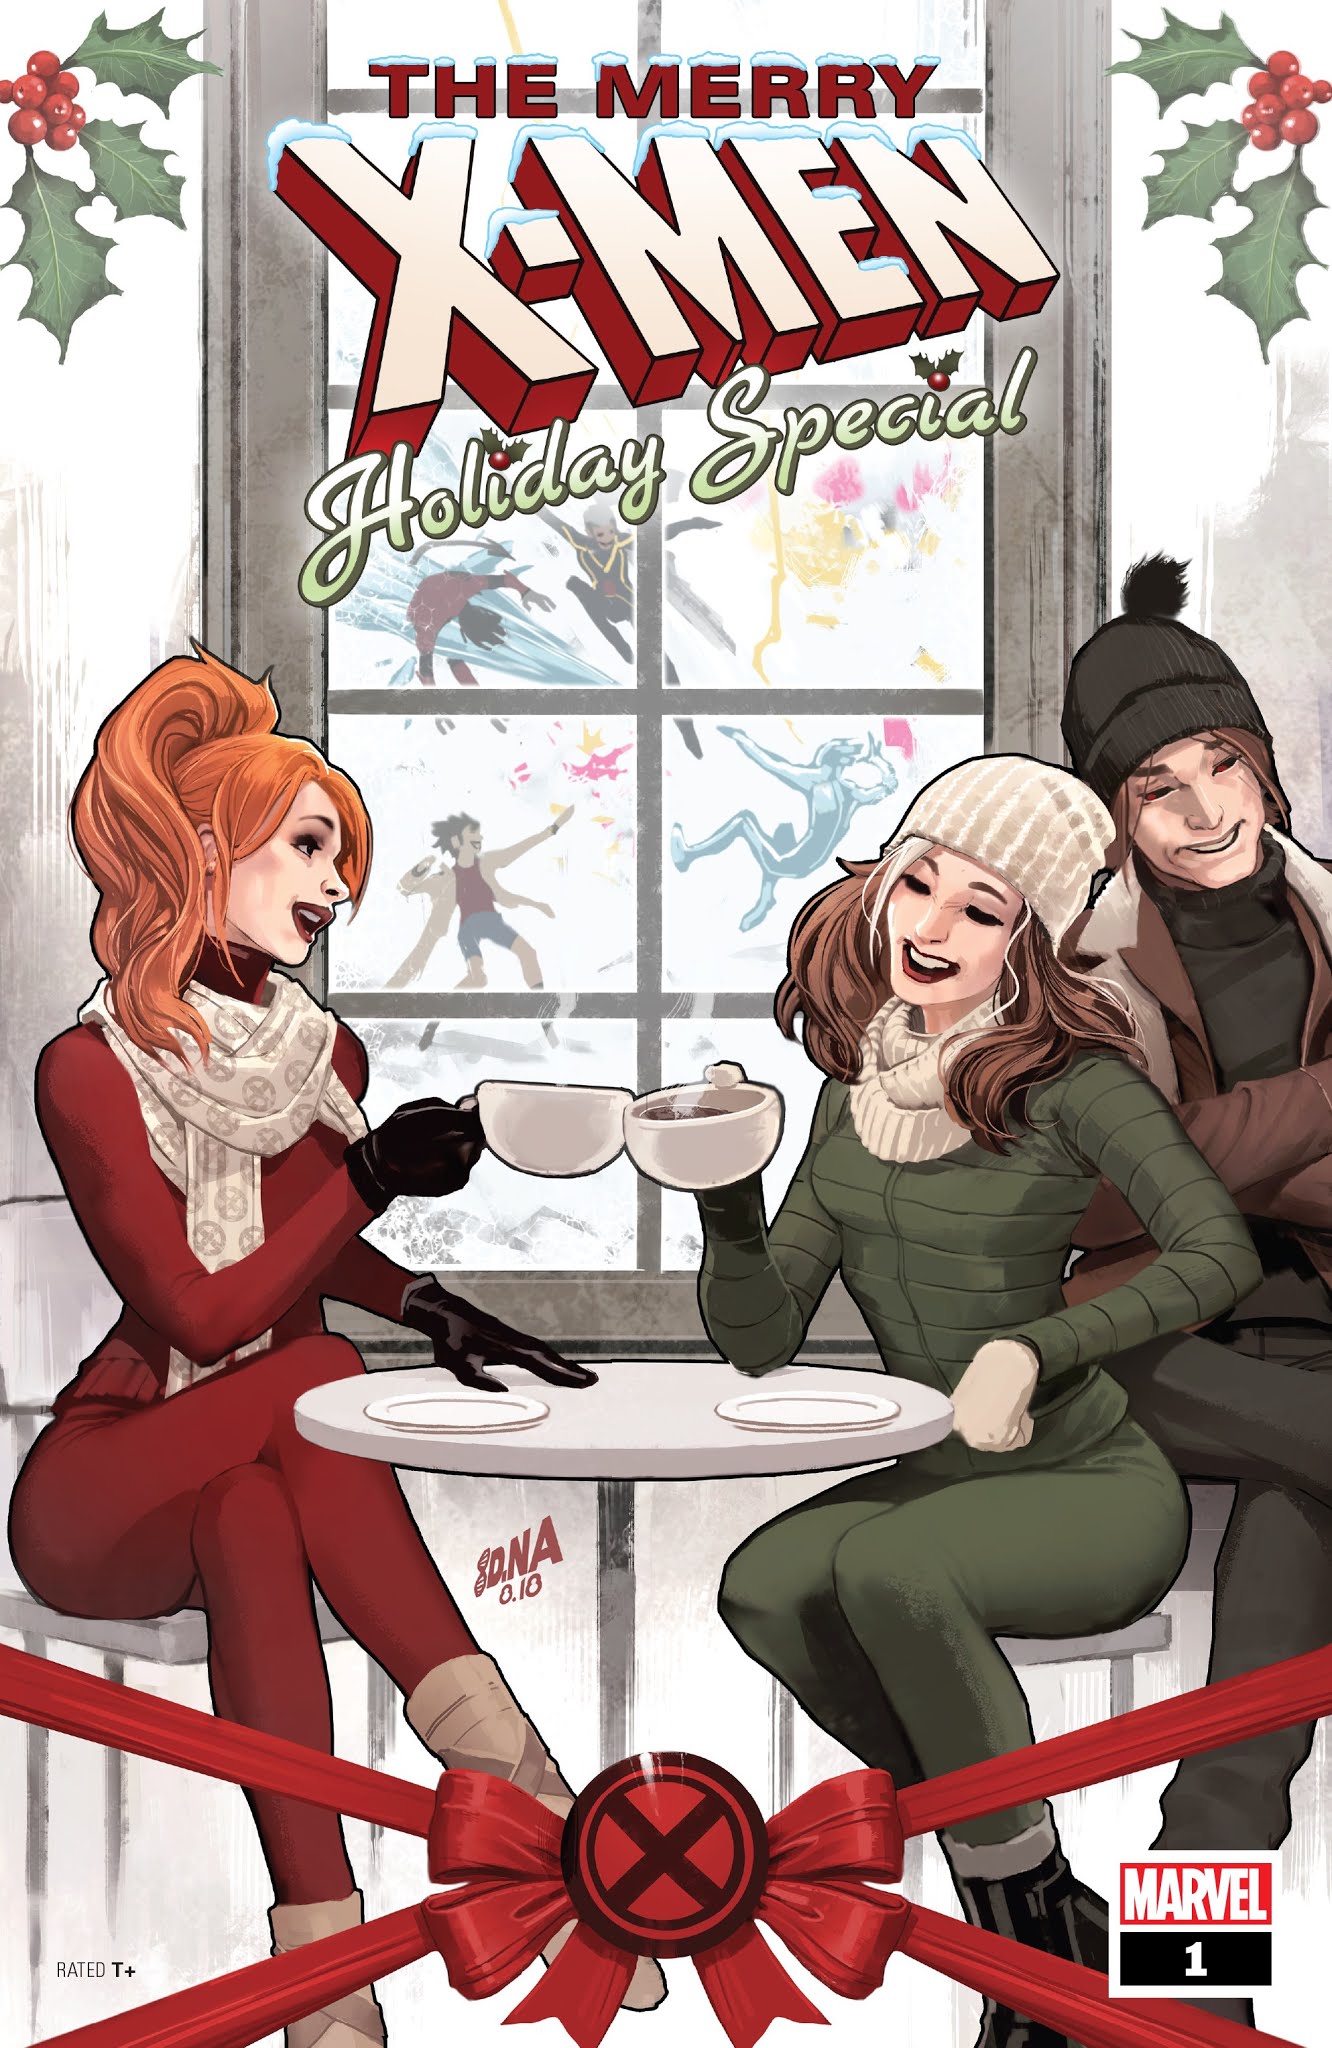 Read online Merry X-Men Holiday Special comic -  Issue # Full - 1